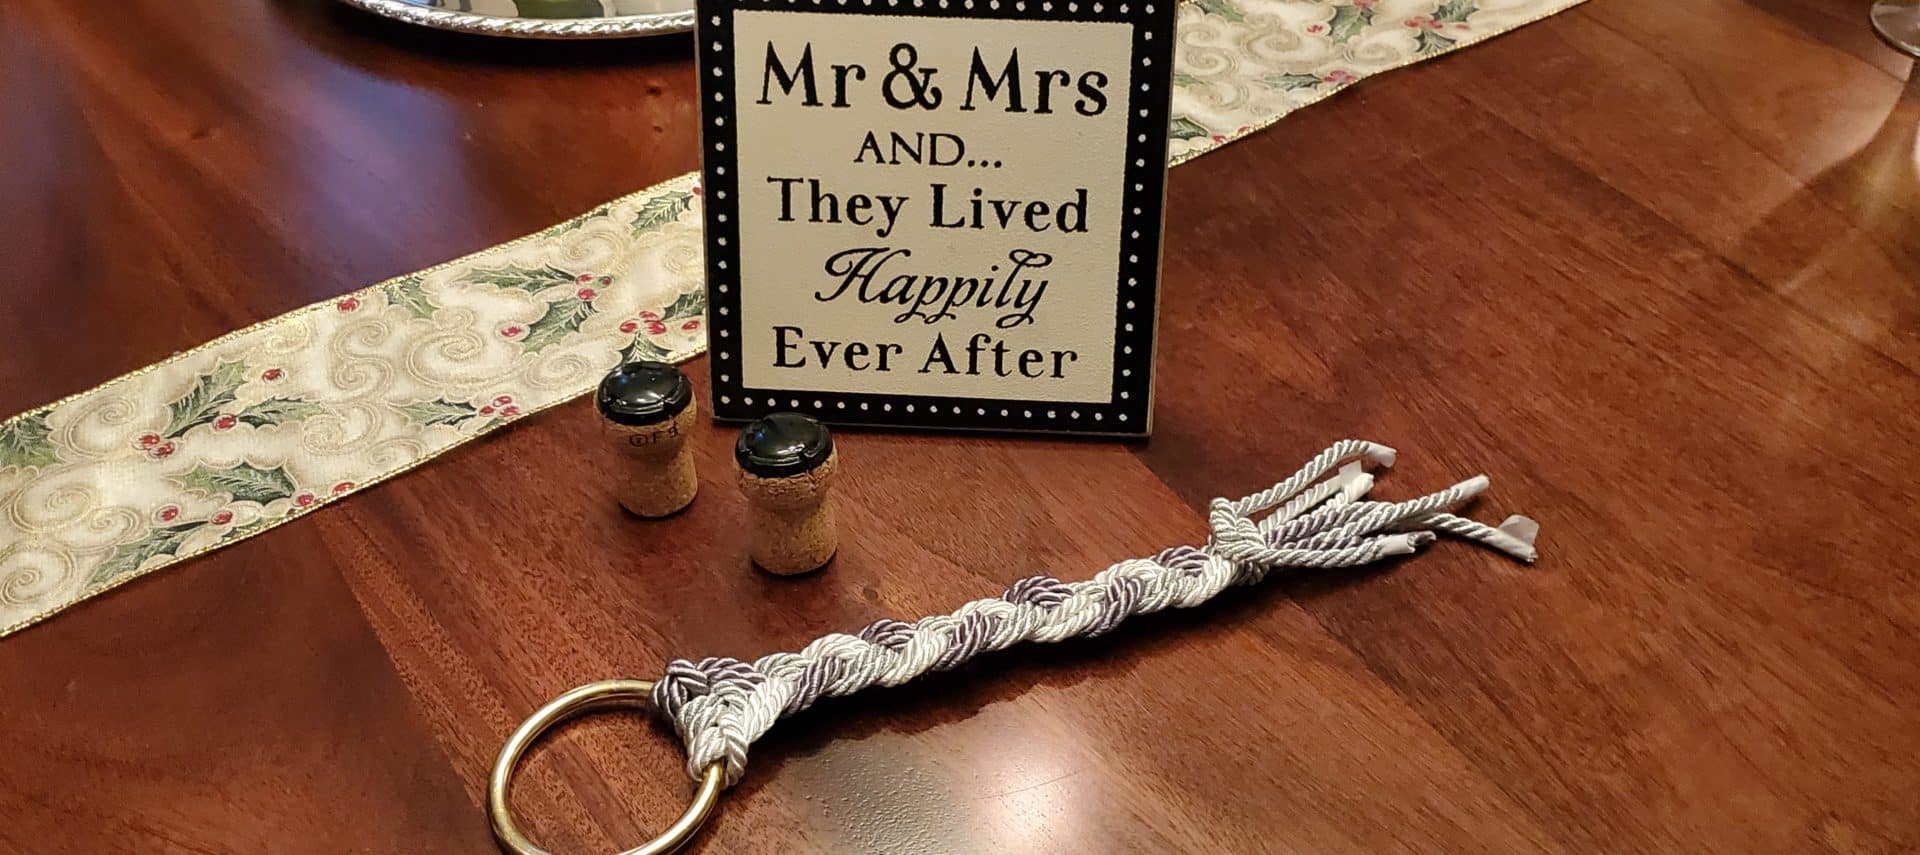 Mr & Mrs sign on table with braided cording